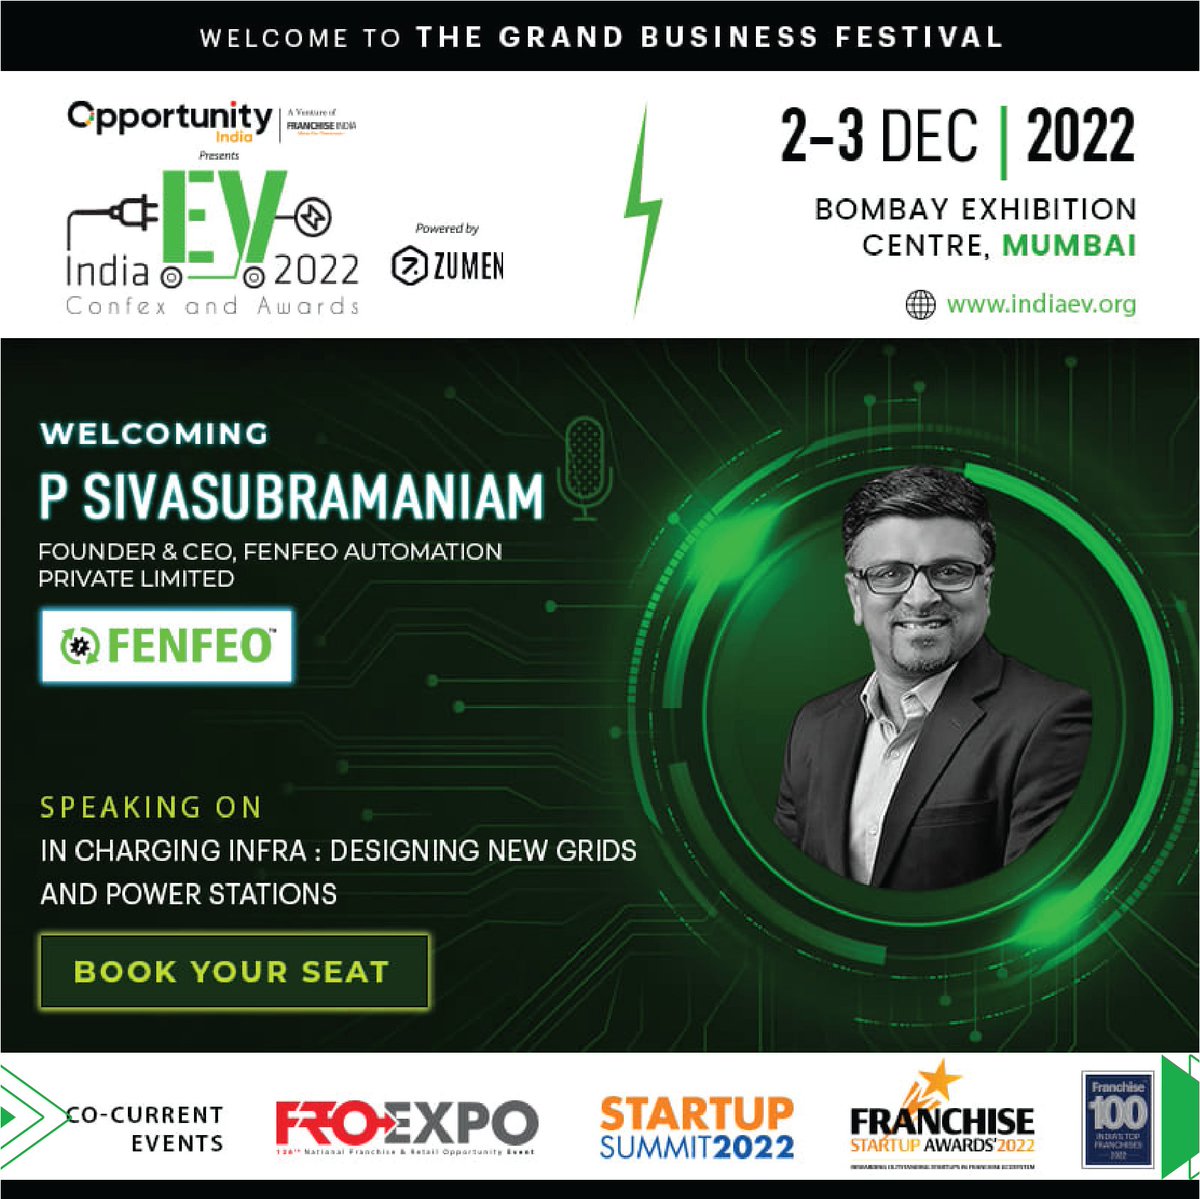 Our CEO, Mr. P. Sivasubramaniam delivering a speech on designing new grids & power stations in India EV 2022 on 2nd & 3rd December at the Bombay Exhibition Centre @OpportunityInd @FranchiseIndia @fenfeo @vijaysethi11 

#fenfeo #rapidev #indiaev #FROExpoMumbai  #FranchiseIndia2022